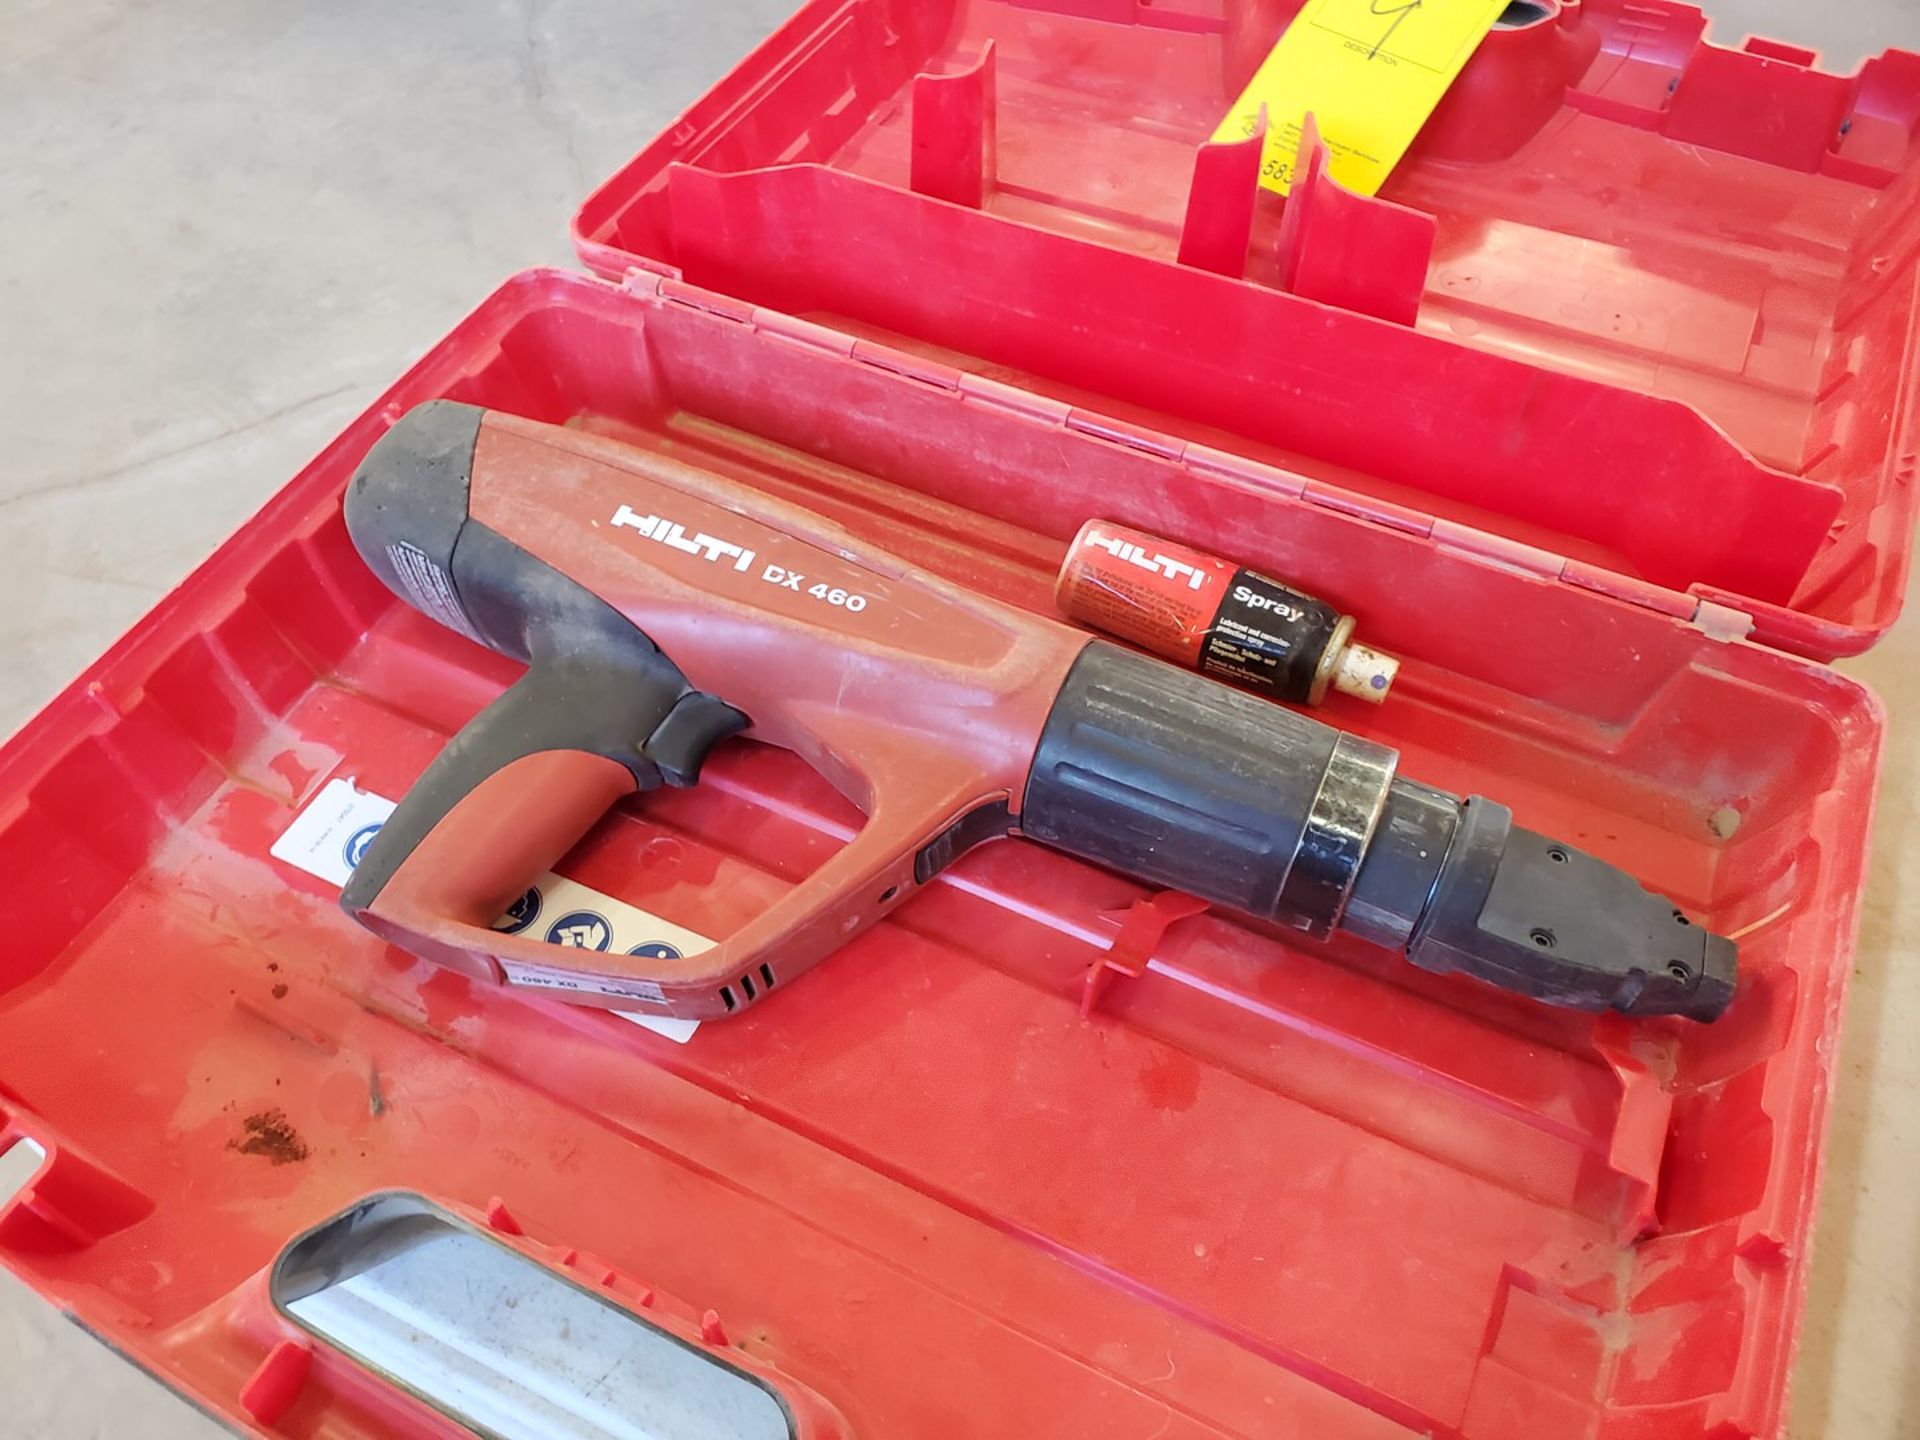 Hilti DX460 Powder-Actuated Fastening Tool - Image 2 of 4